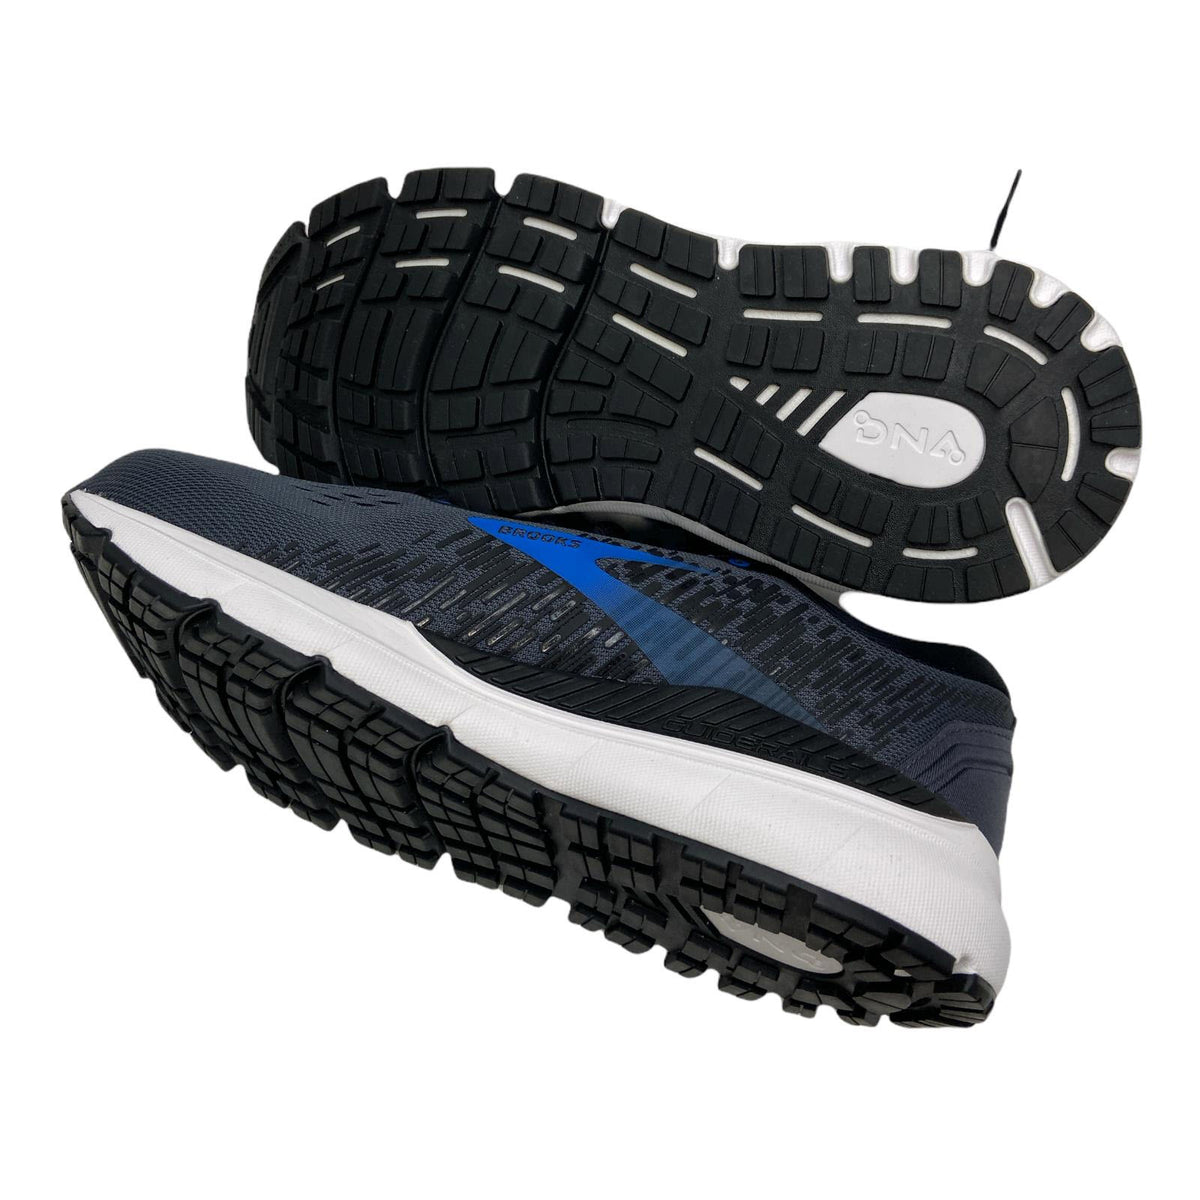 A pair of Brooks Addiction GTS 15 INK/BLACK running shoes with GuideRail technology for overpronators and a thick tread on the sole.